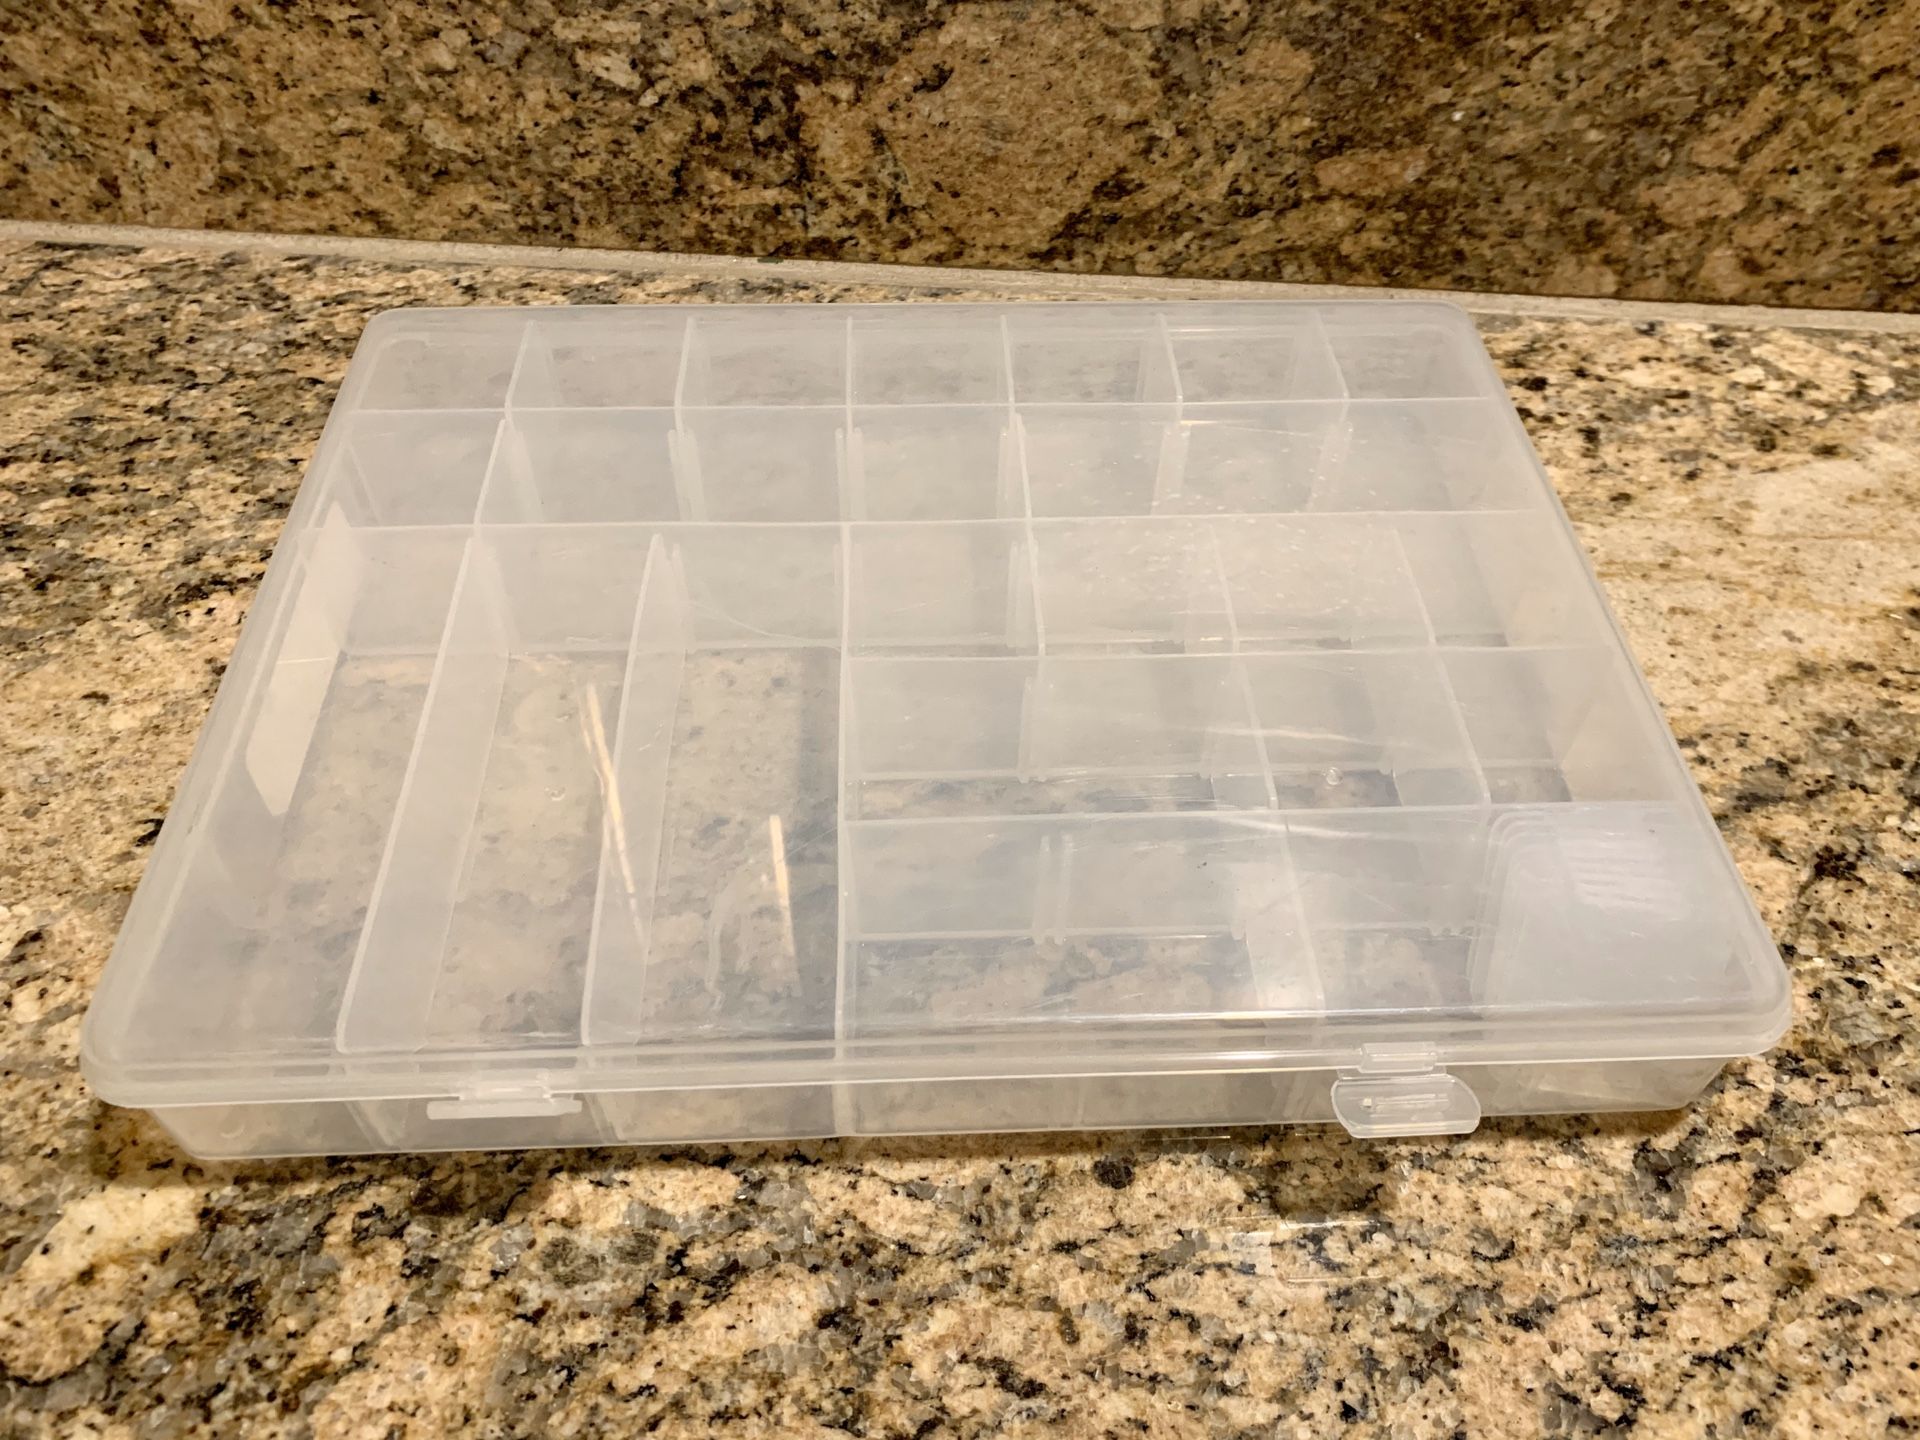 Iris Craft Case with movable dividers